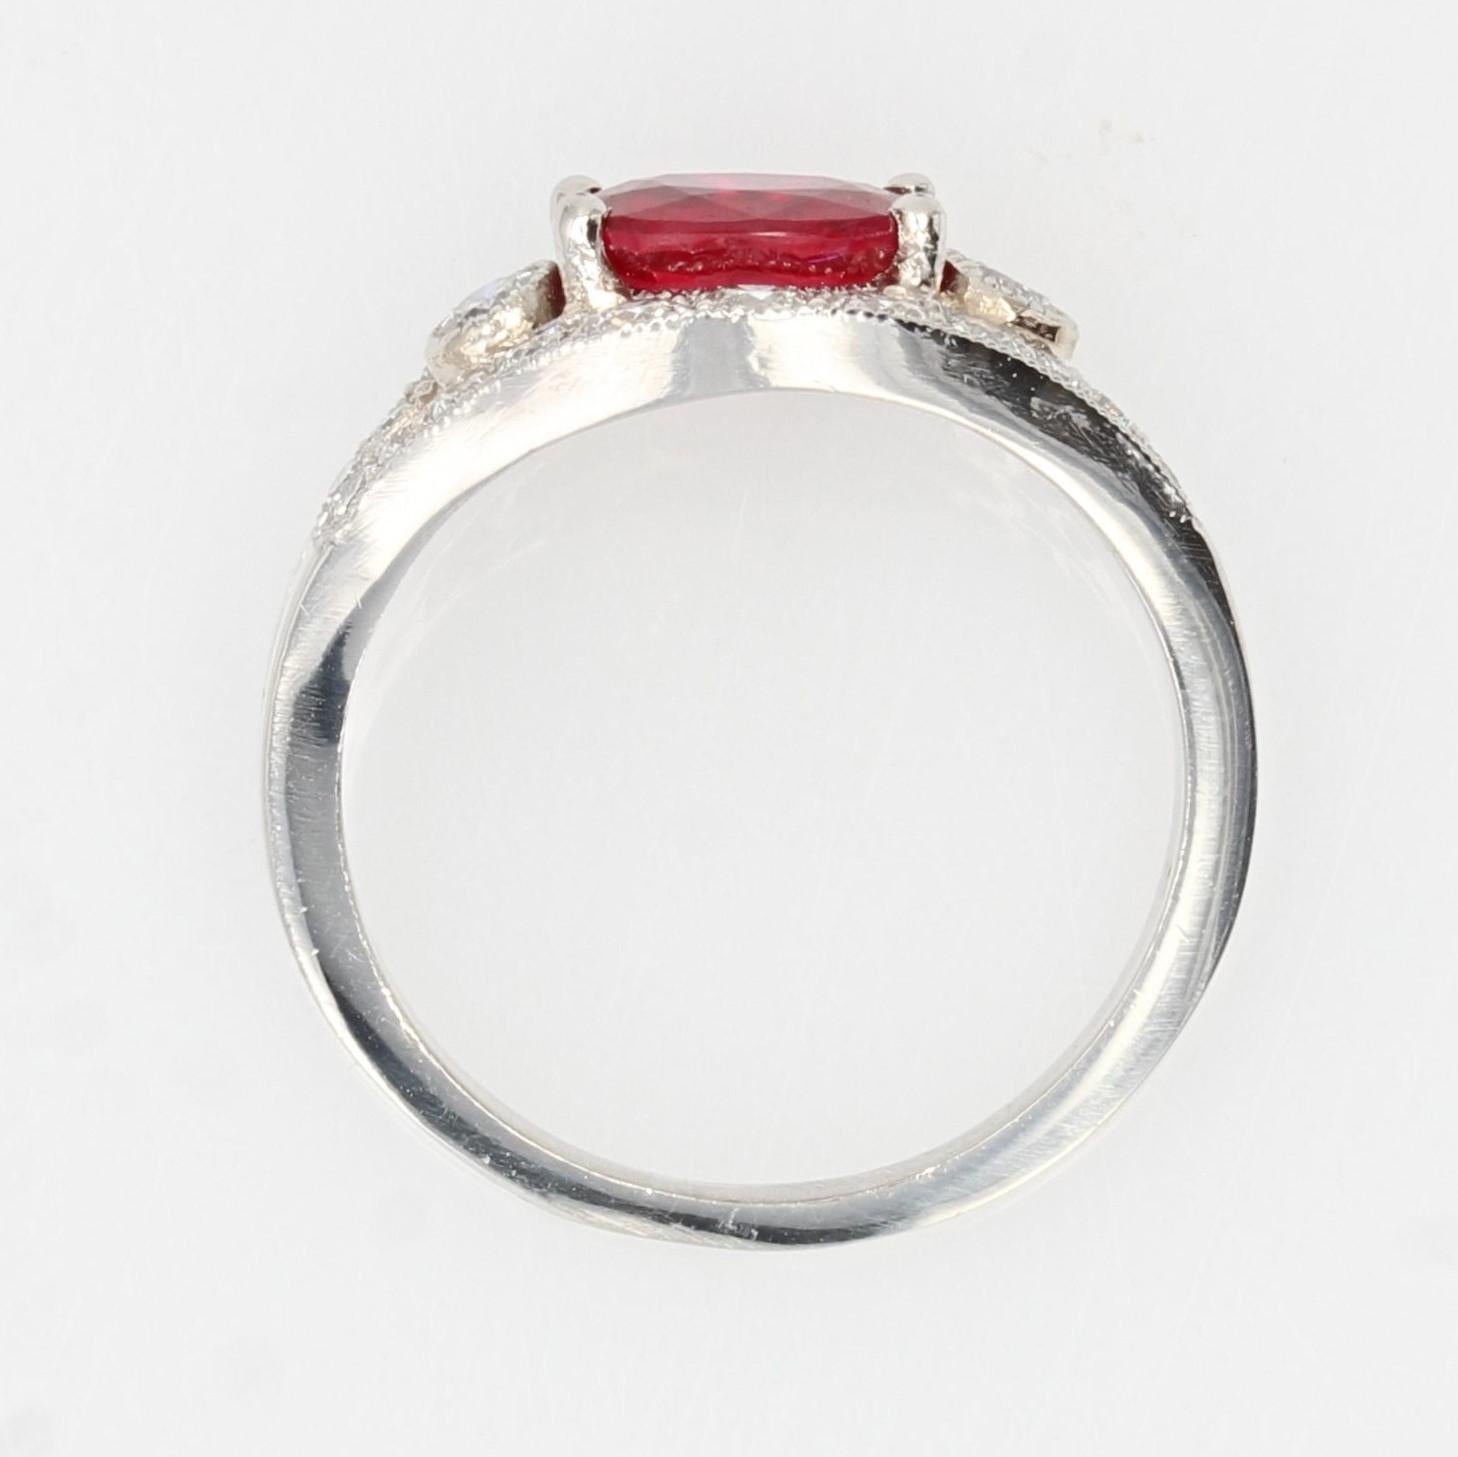 French Modern 1, 22 Carat Ruby Diamonds Platinum Ring For Sale 4